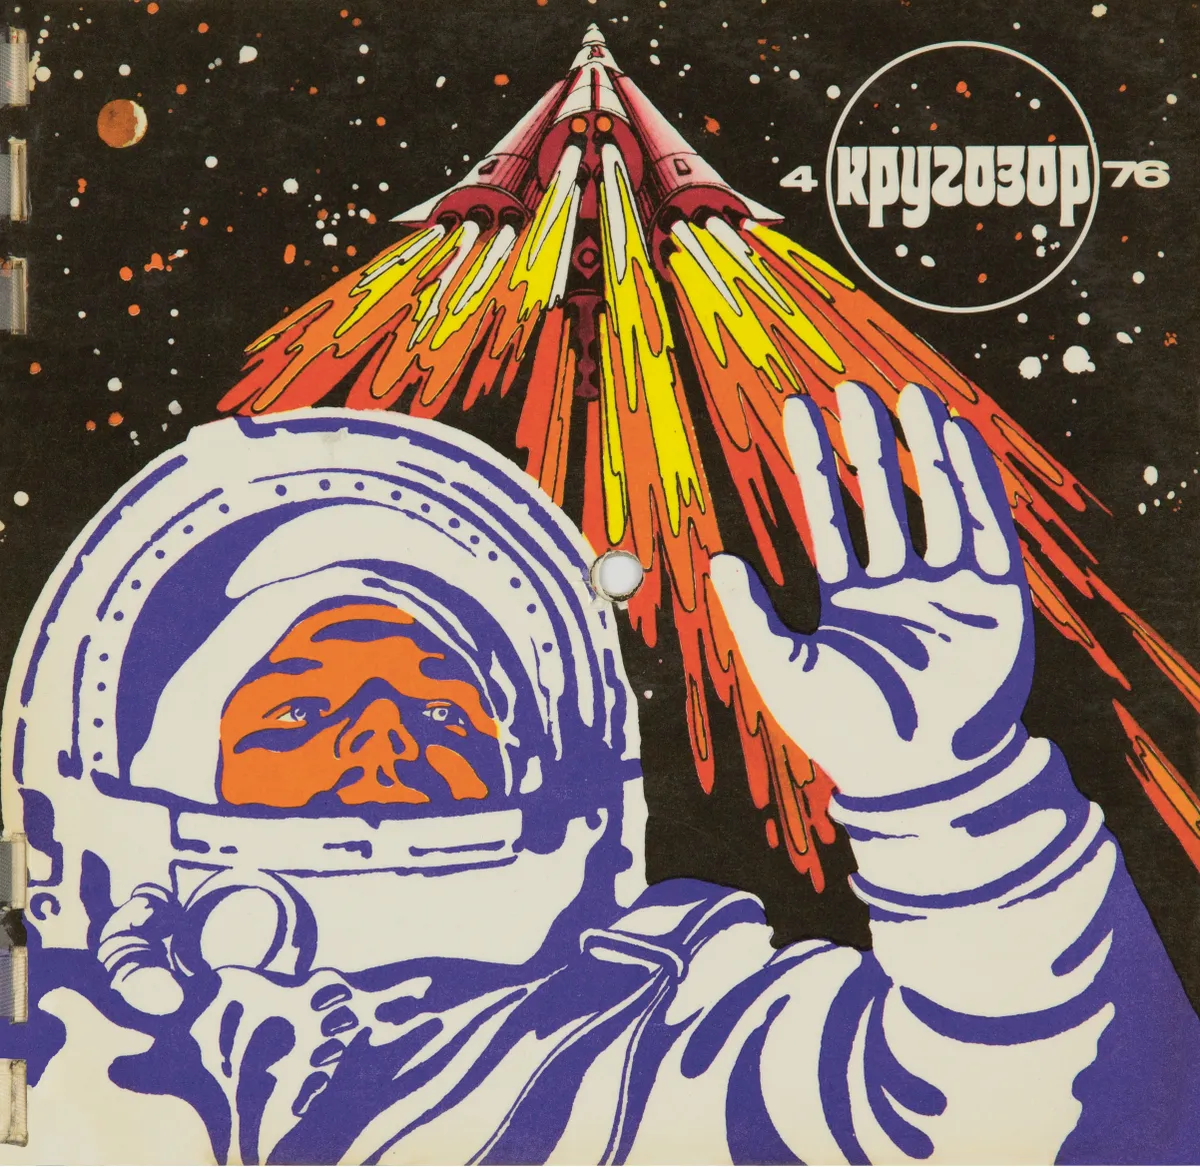 Outlook, issue 4, 1976, ‘Yuri Gagarin: Let’s Go!’, illustration by S. Alimov. The first track on the magazine’s accompanying flexi-disc record was a recording by Gagarin titled ‘Planet Earth is Beautiful’. Picture credit: The Moscow Design Museum